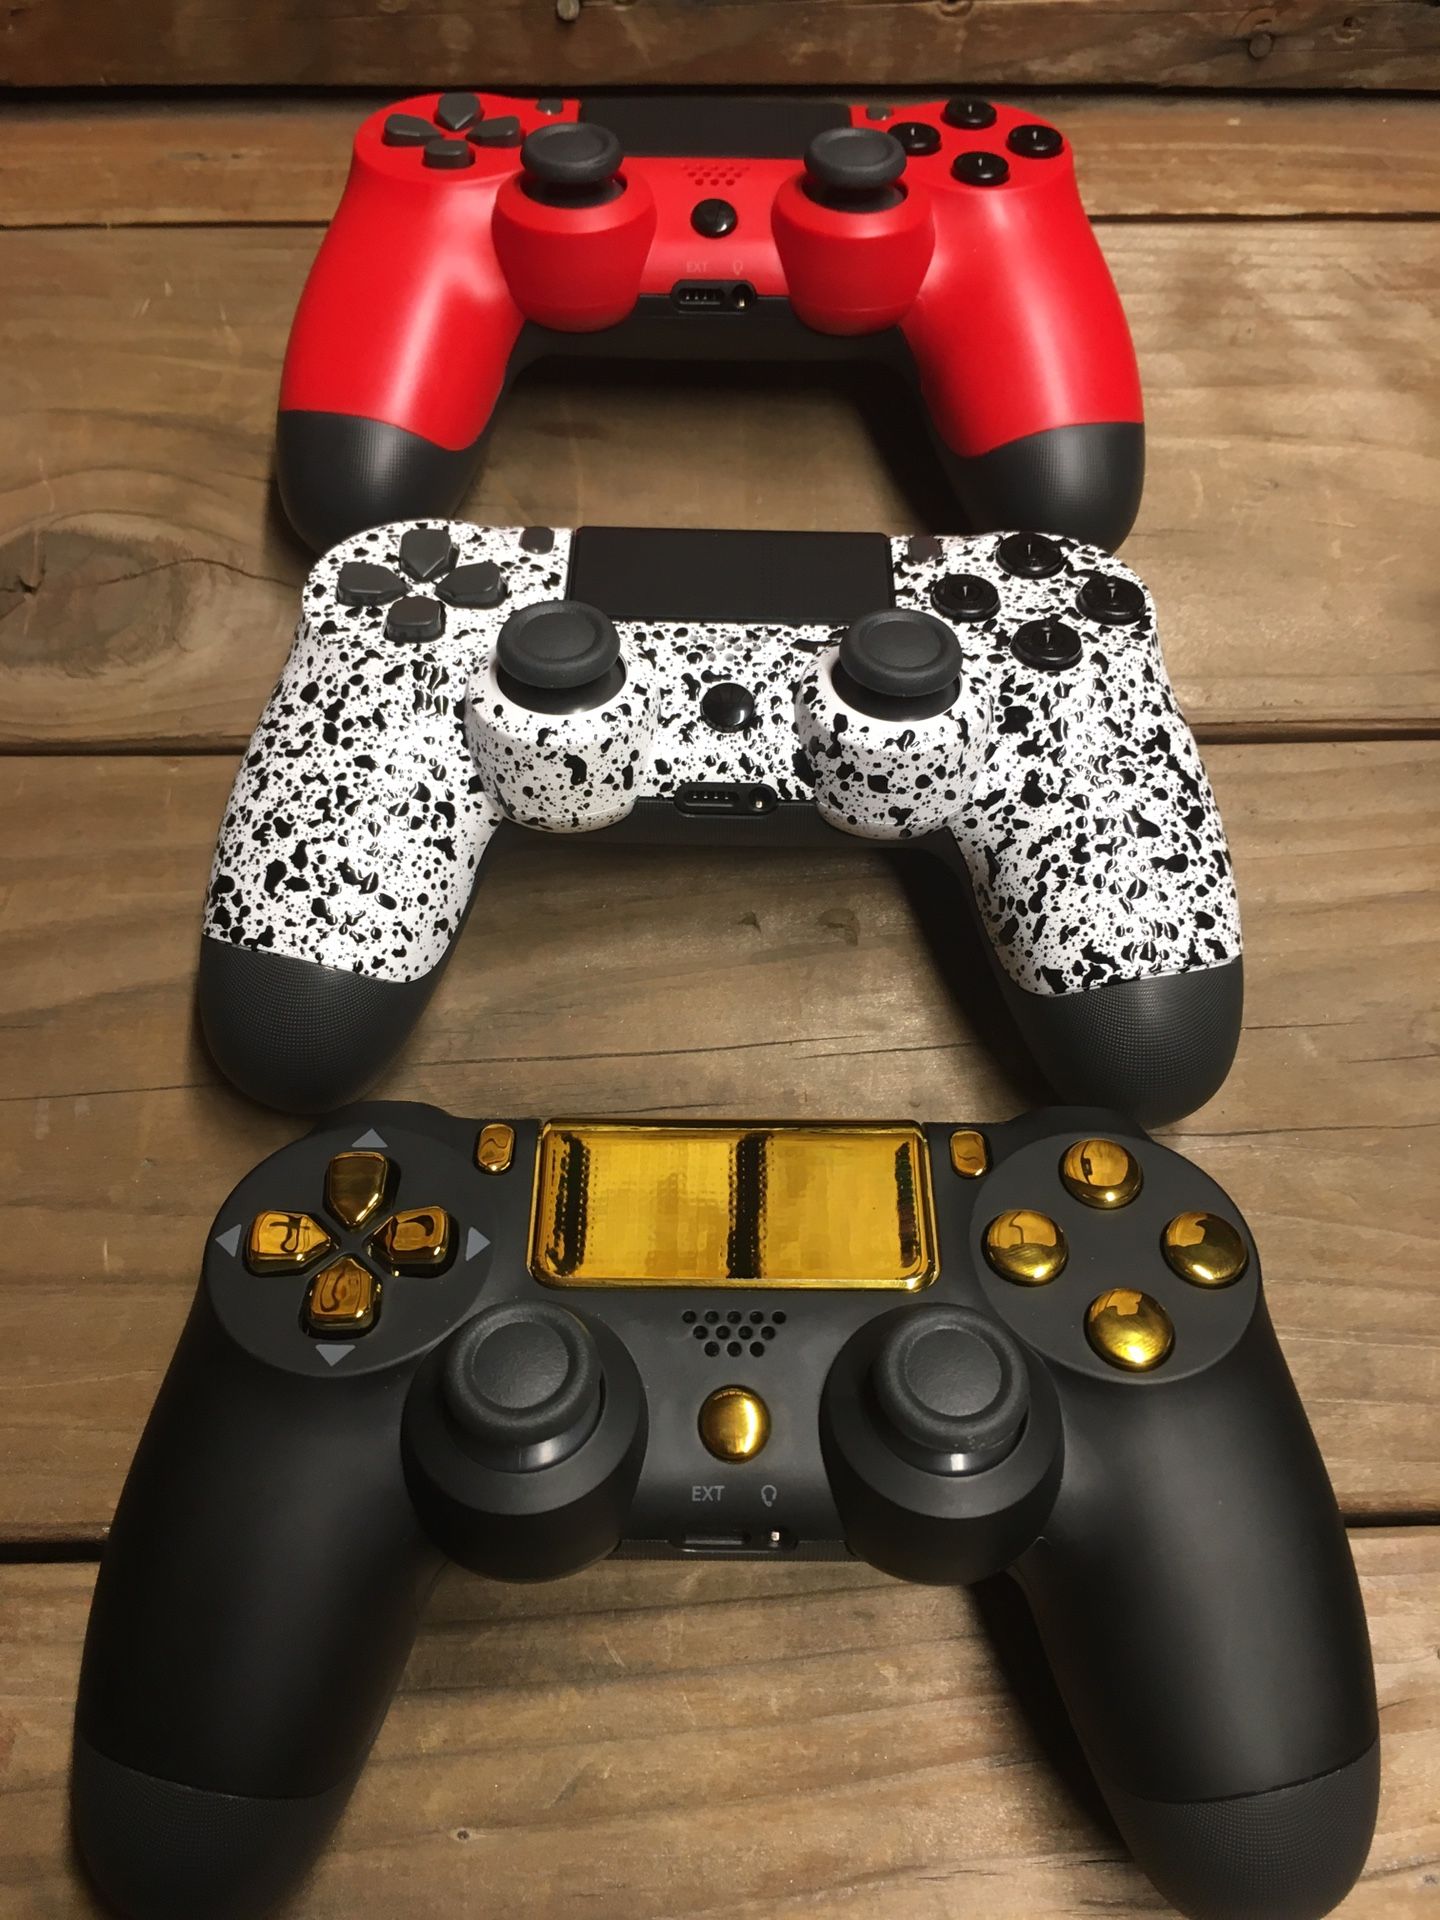 Three Custom Wireless Controllers for Sony PlayStation 4 (PS4), Android, iOS, PS3, and PC